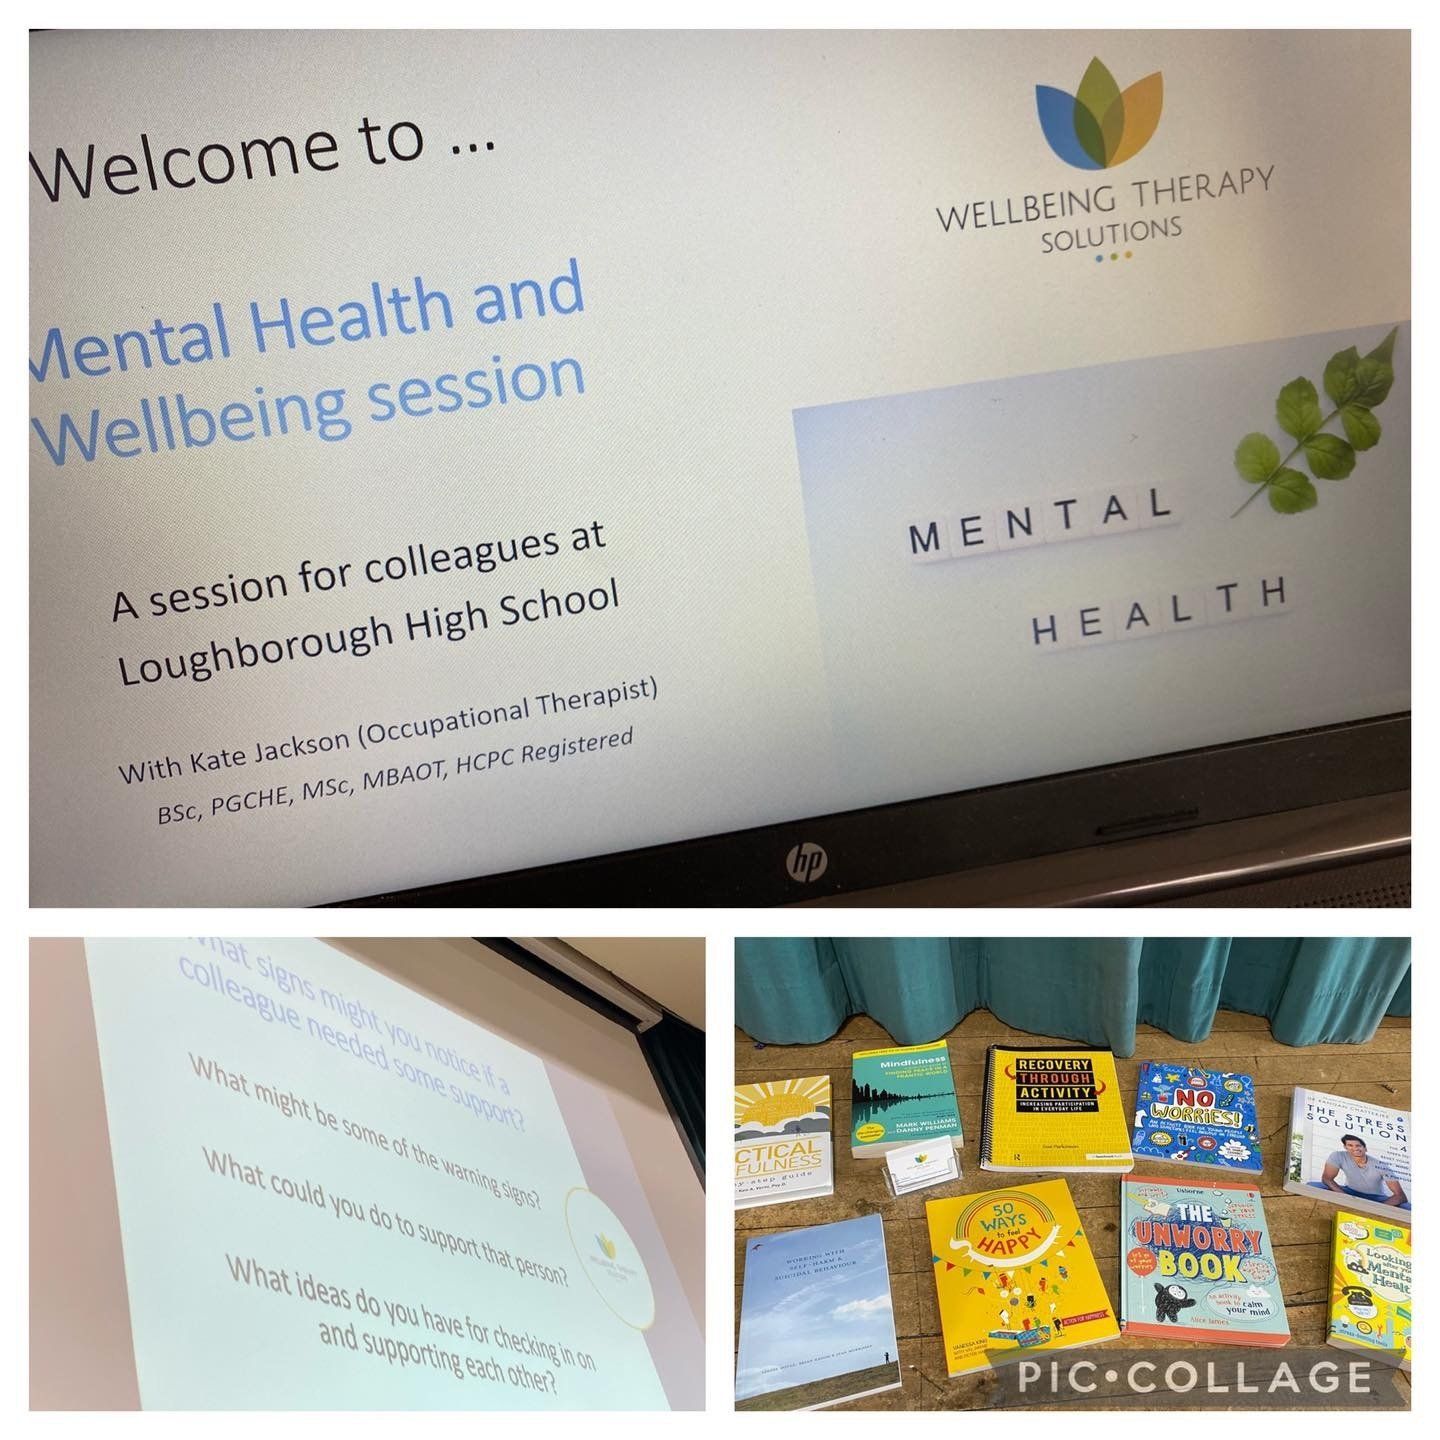 Images showing the online sessions for Kate Jackson's Wellbeing sessions at Loughborough High School